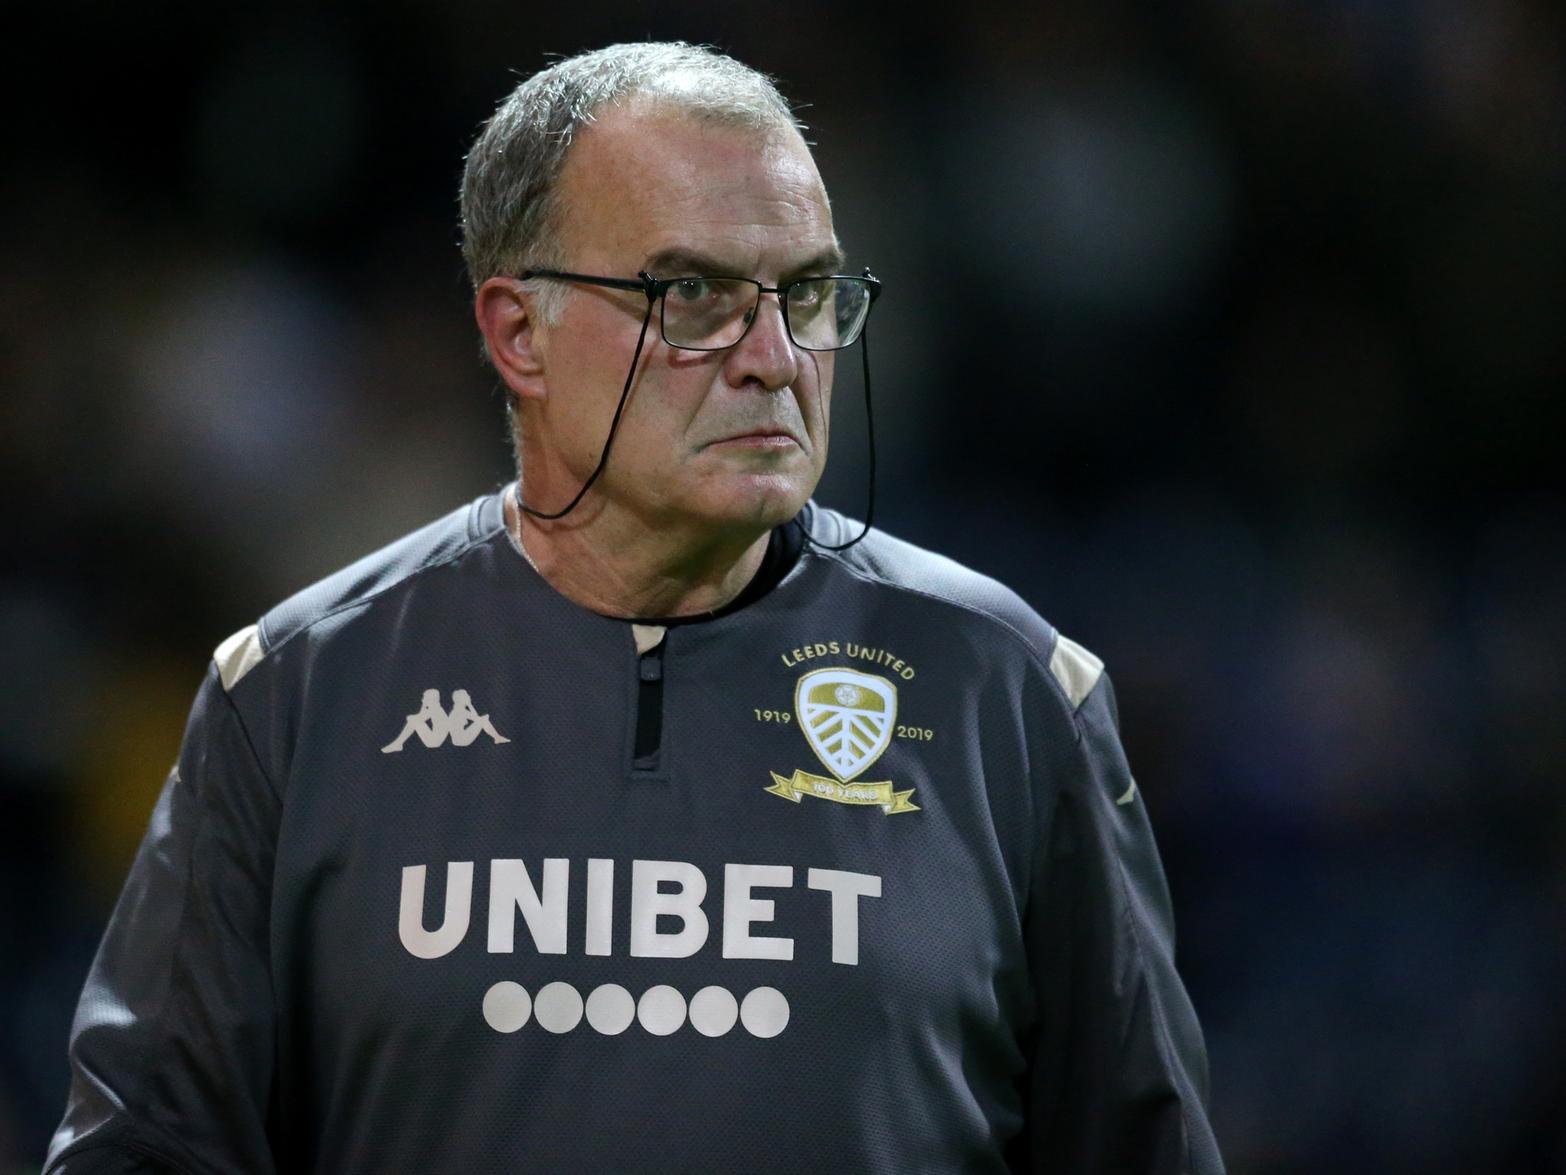 Leeds manager Marcelo Bielsa has hinted that he could field both Patrick Bamford and Eddie Nketiah in the same line-up, as he looks to get his side scoring more goals. (Yorkshire Evening Post)